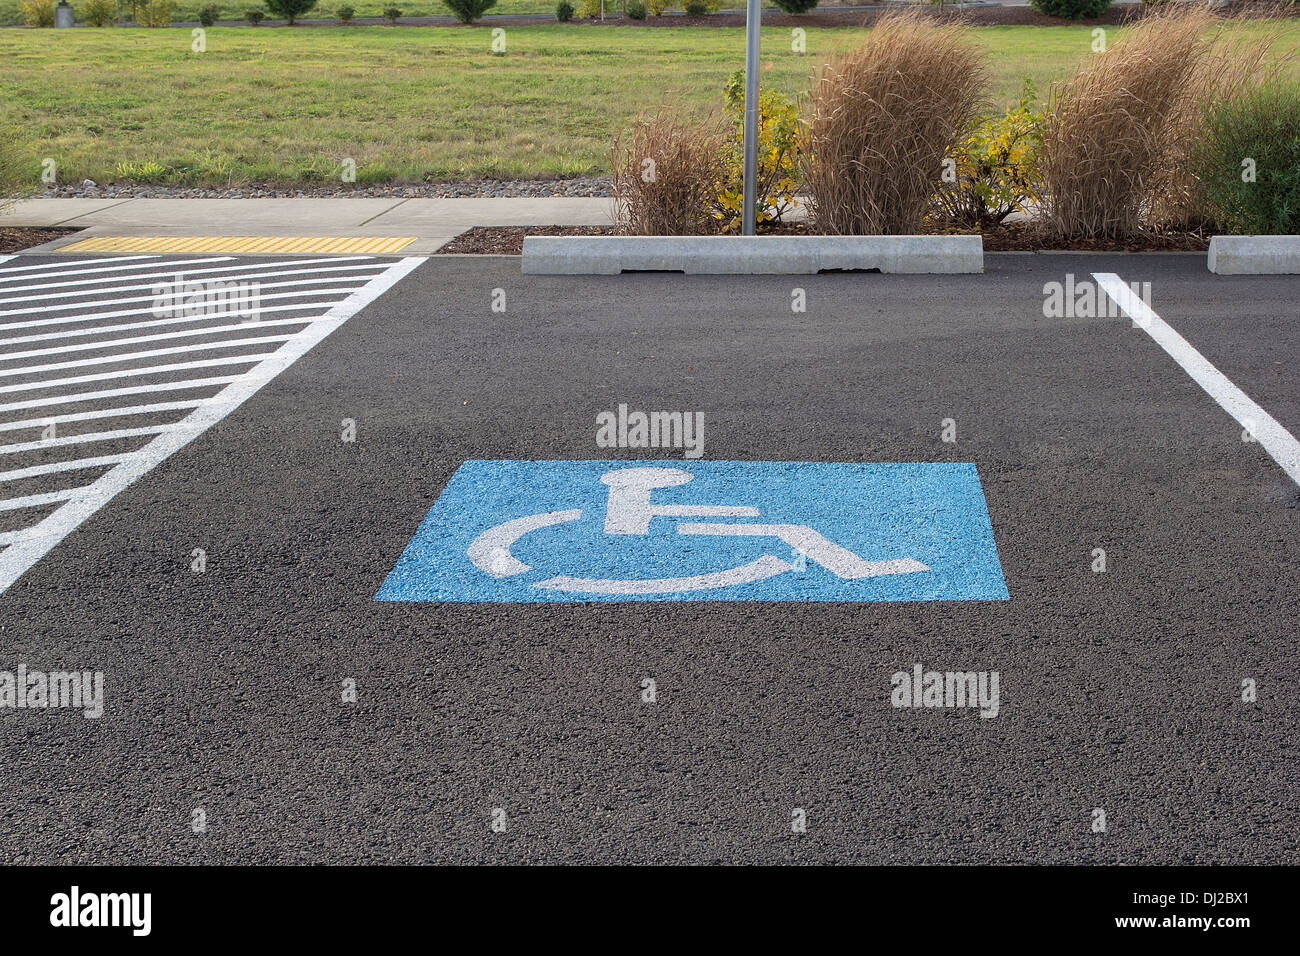 Handicapped Parking Space at Business Location Stock Photo